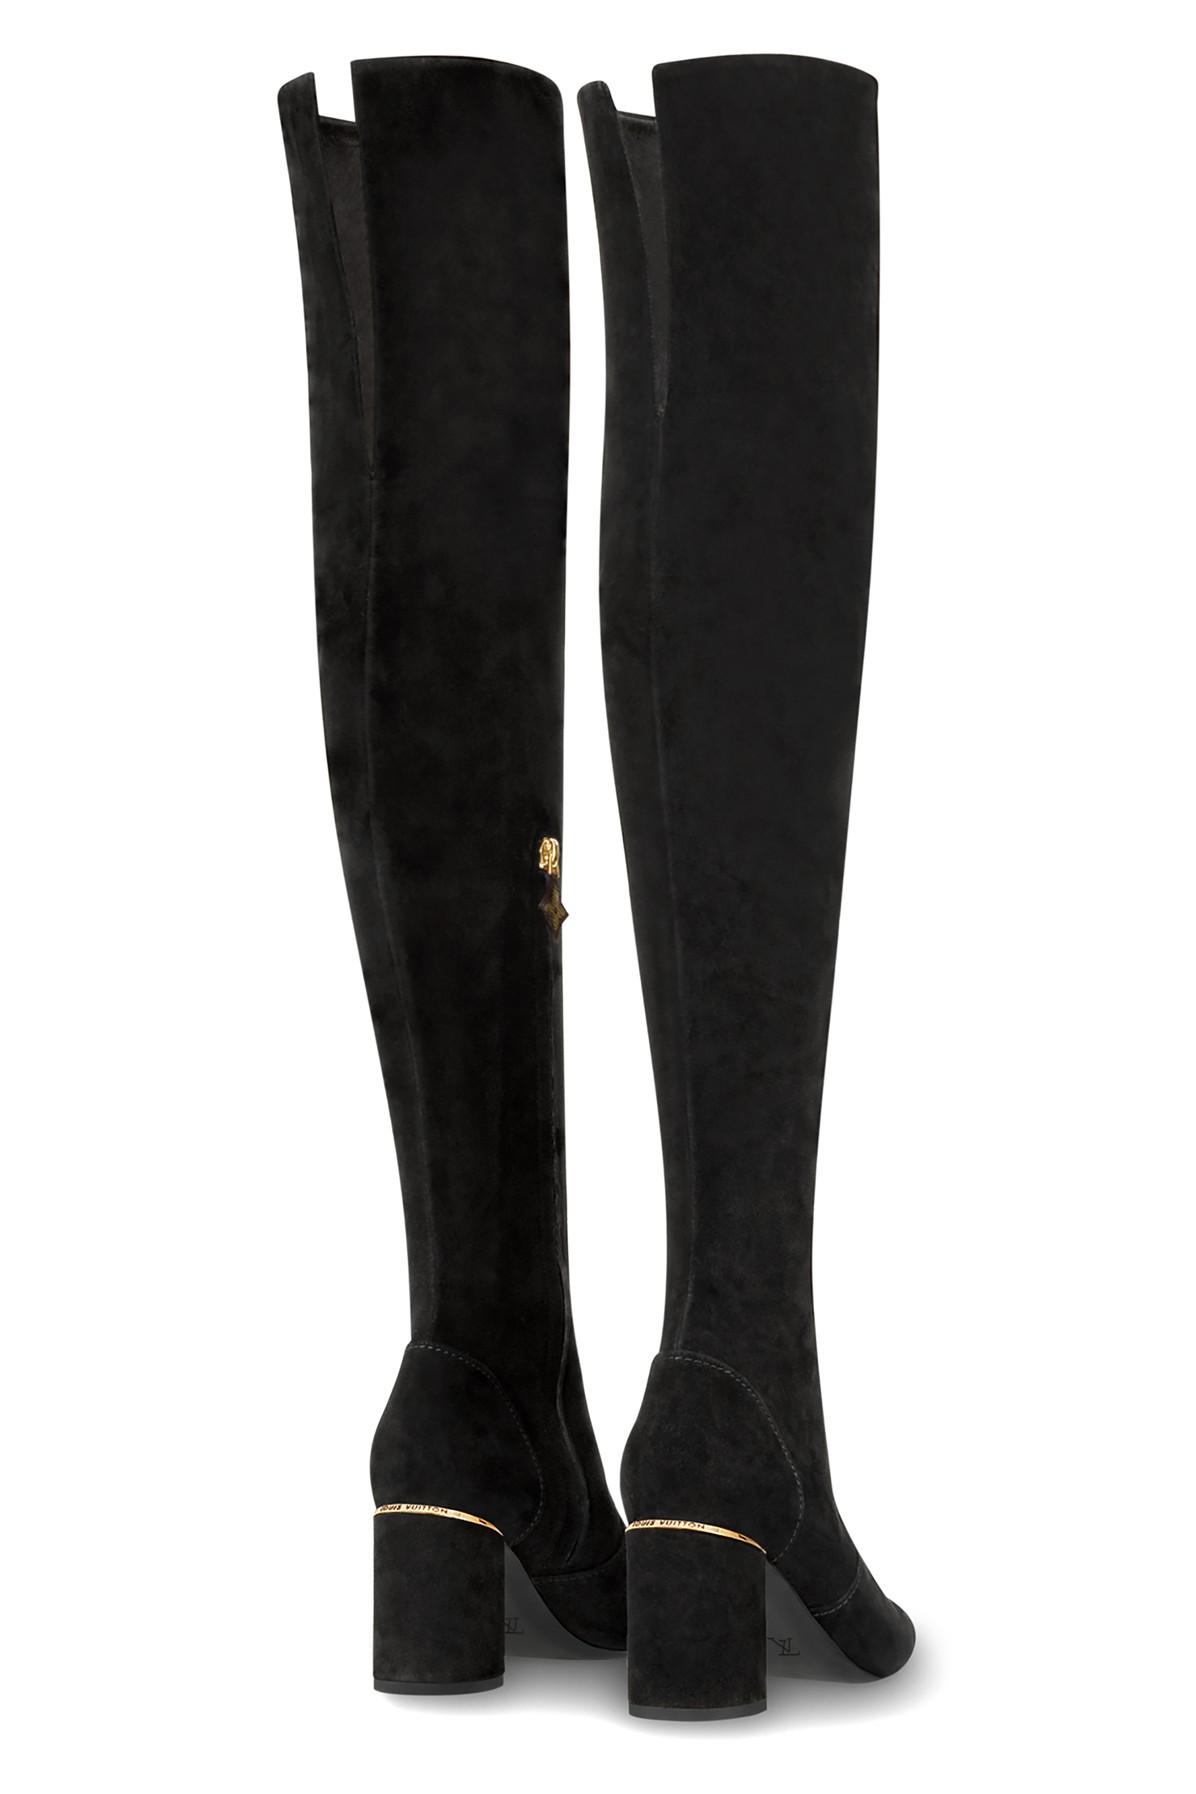 Repentance secondary Exquisite Louis Vuitton Skyline Thigh Boot in Black | Lyst